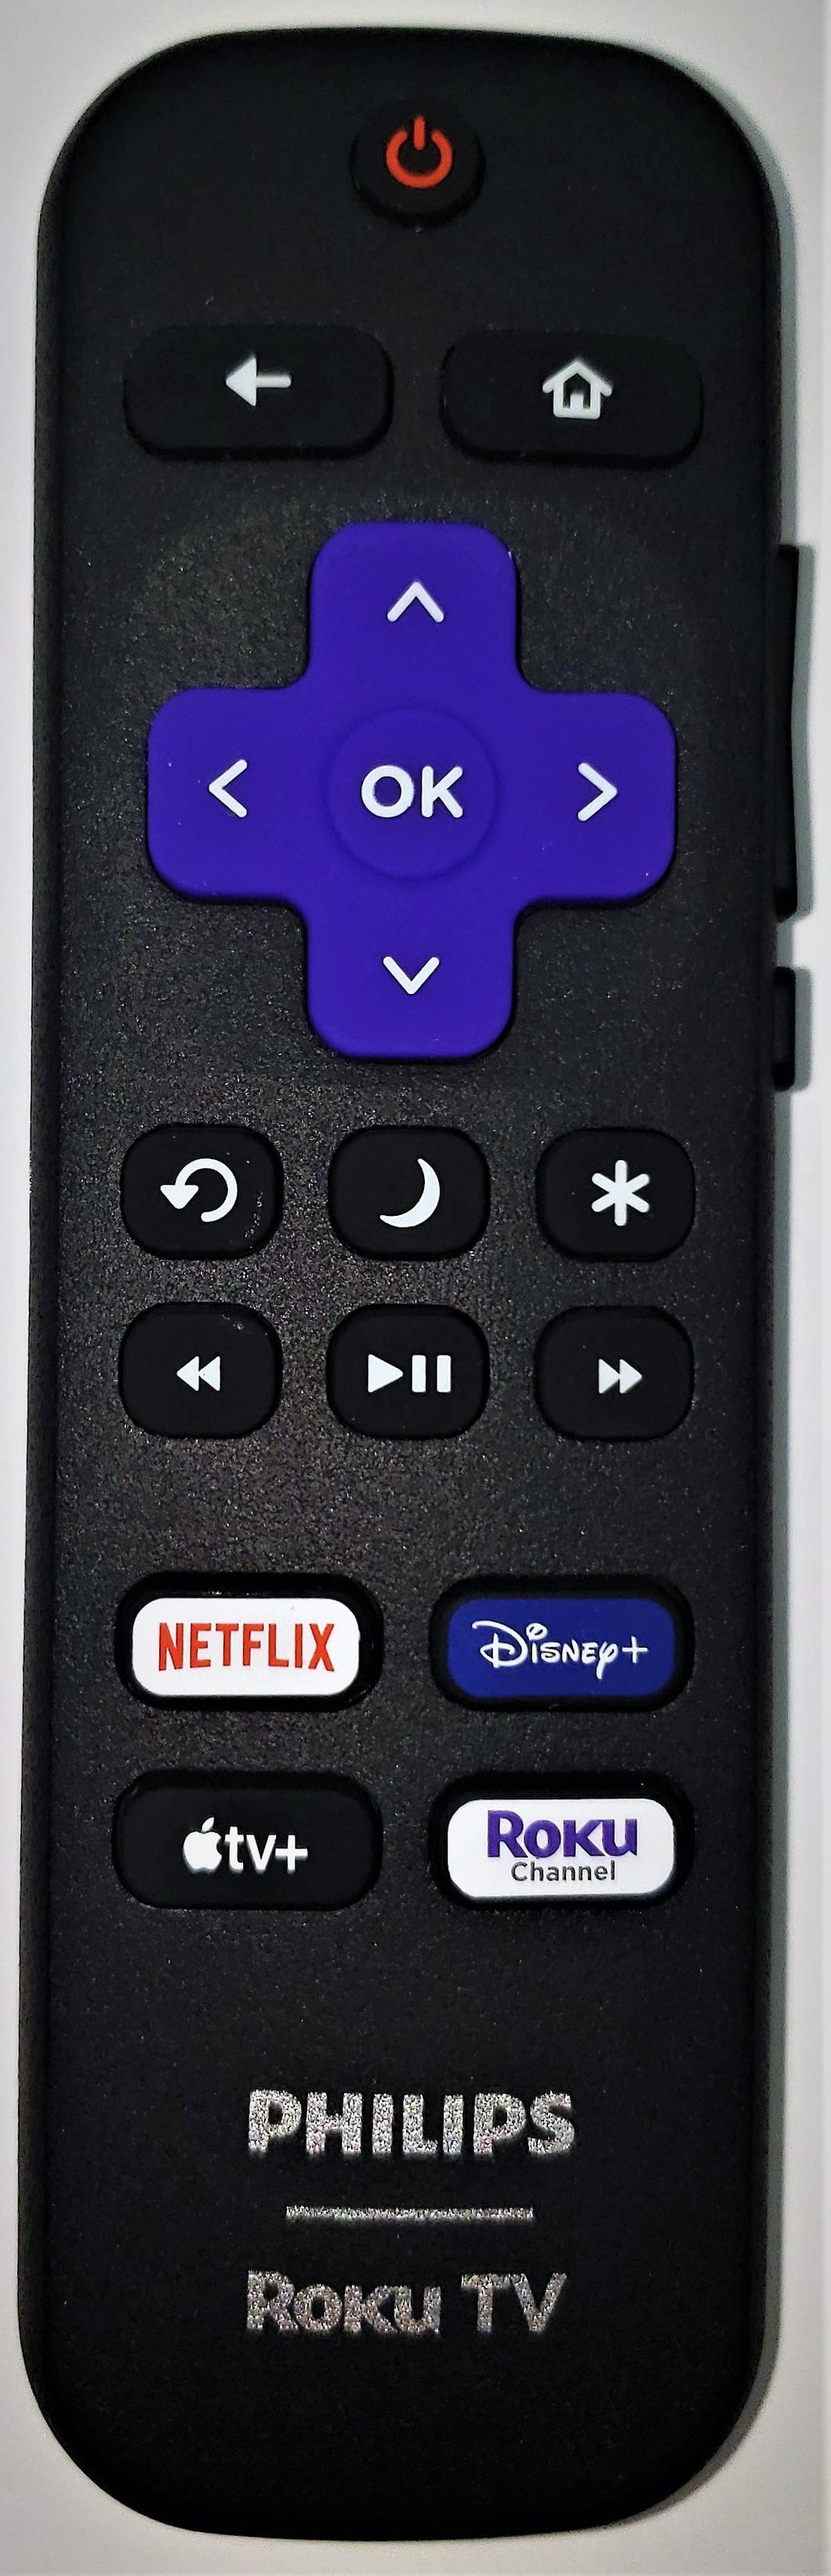 OEM replacement remote control for Philips Roku TV URMT21CND025